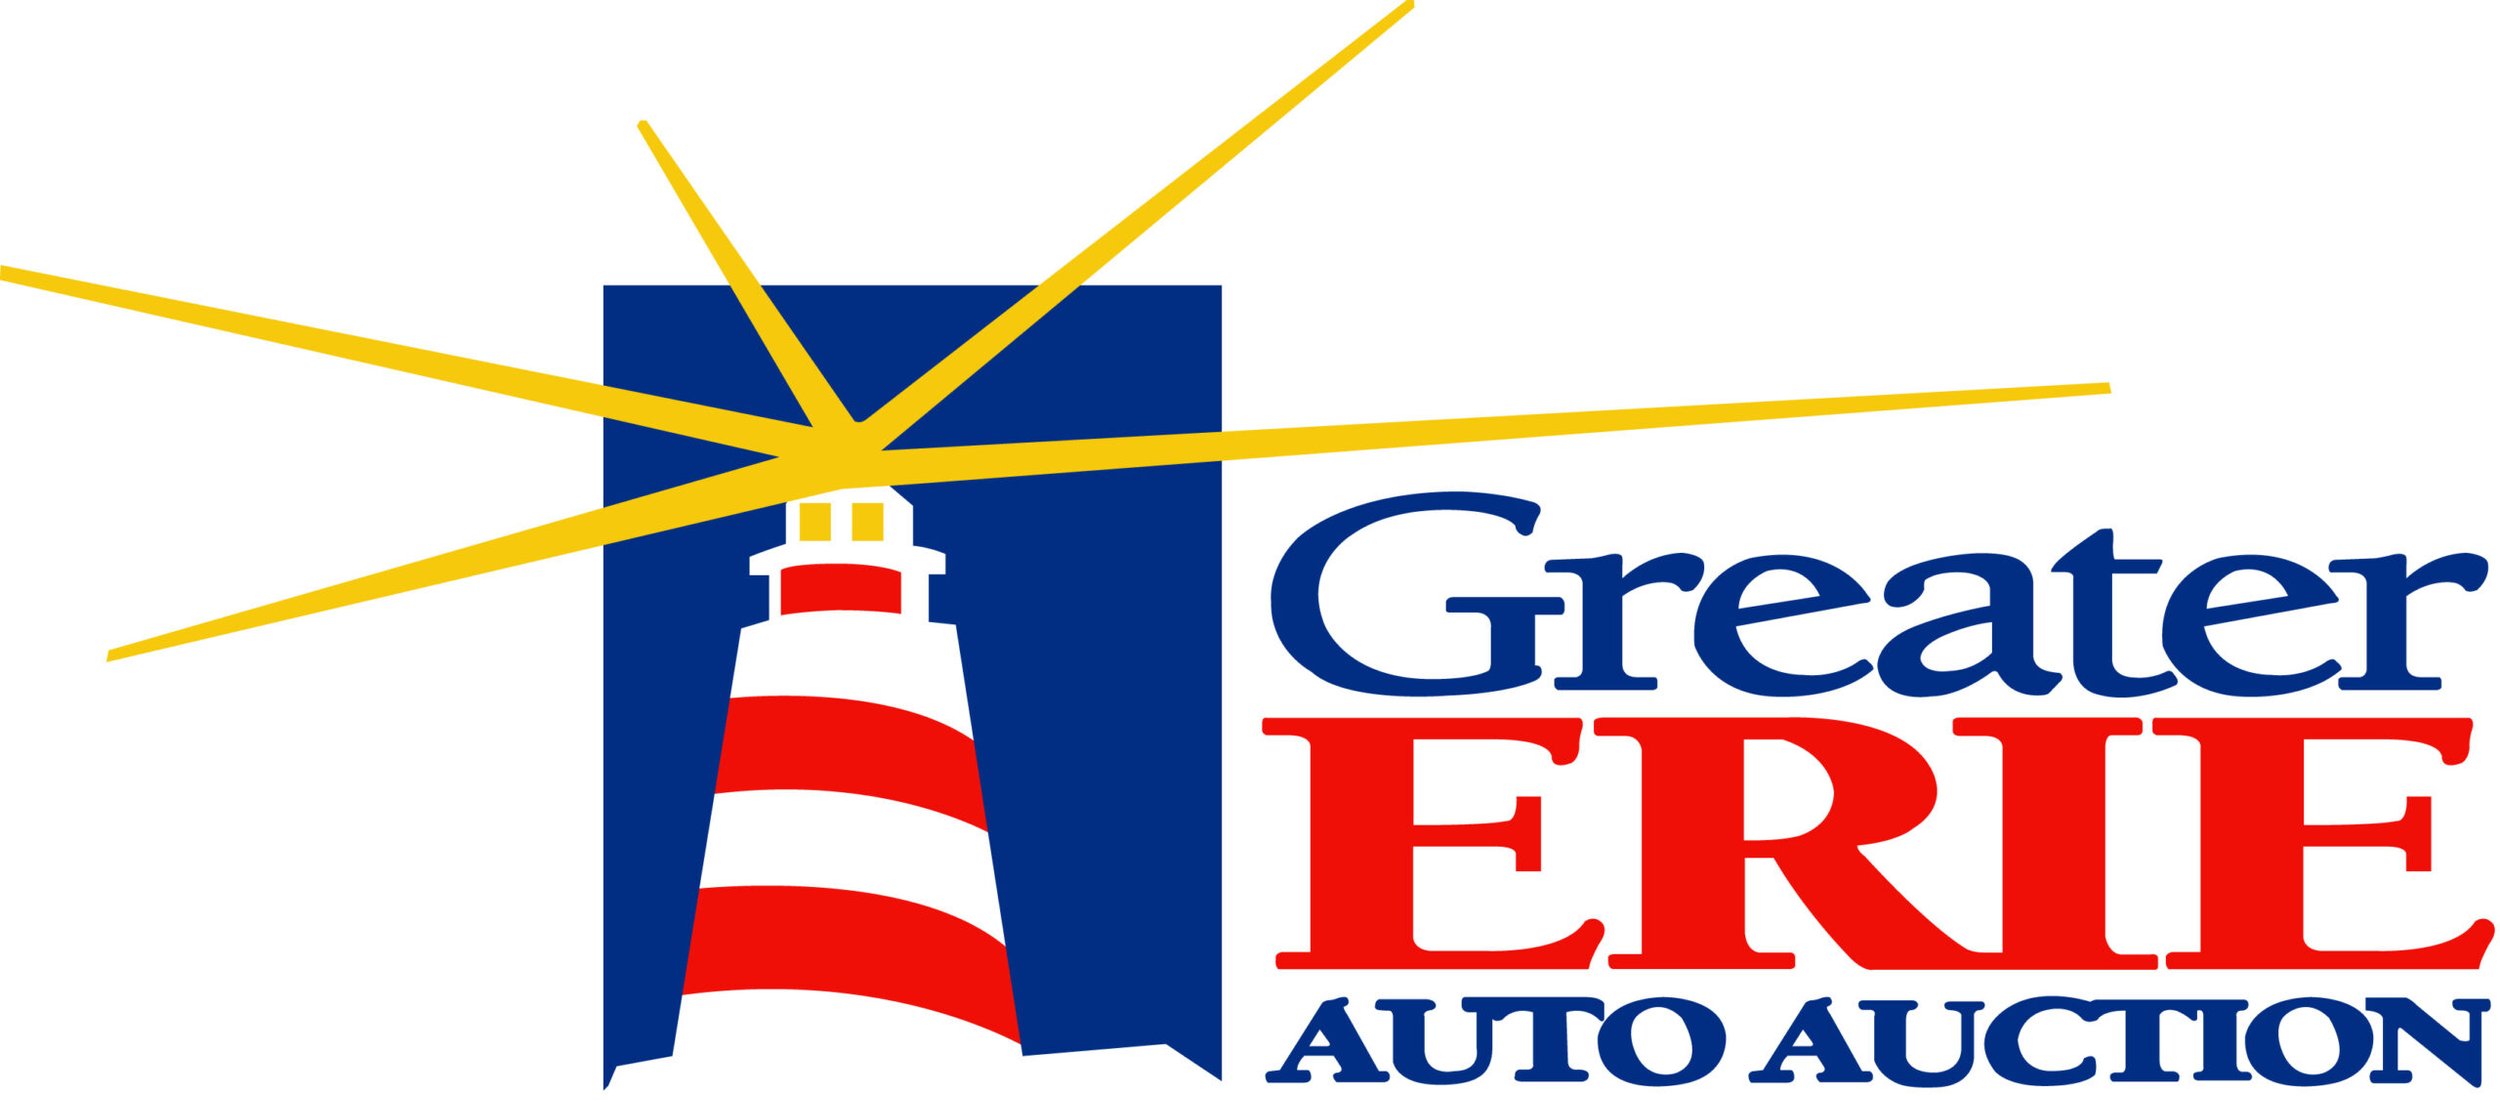 Greater-Erie-Auto-Auction-scaled.jpg